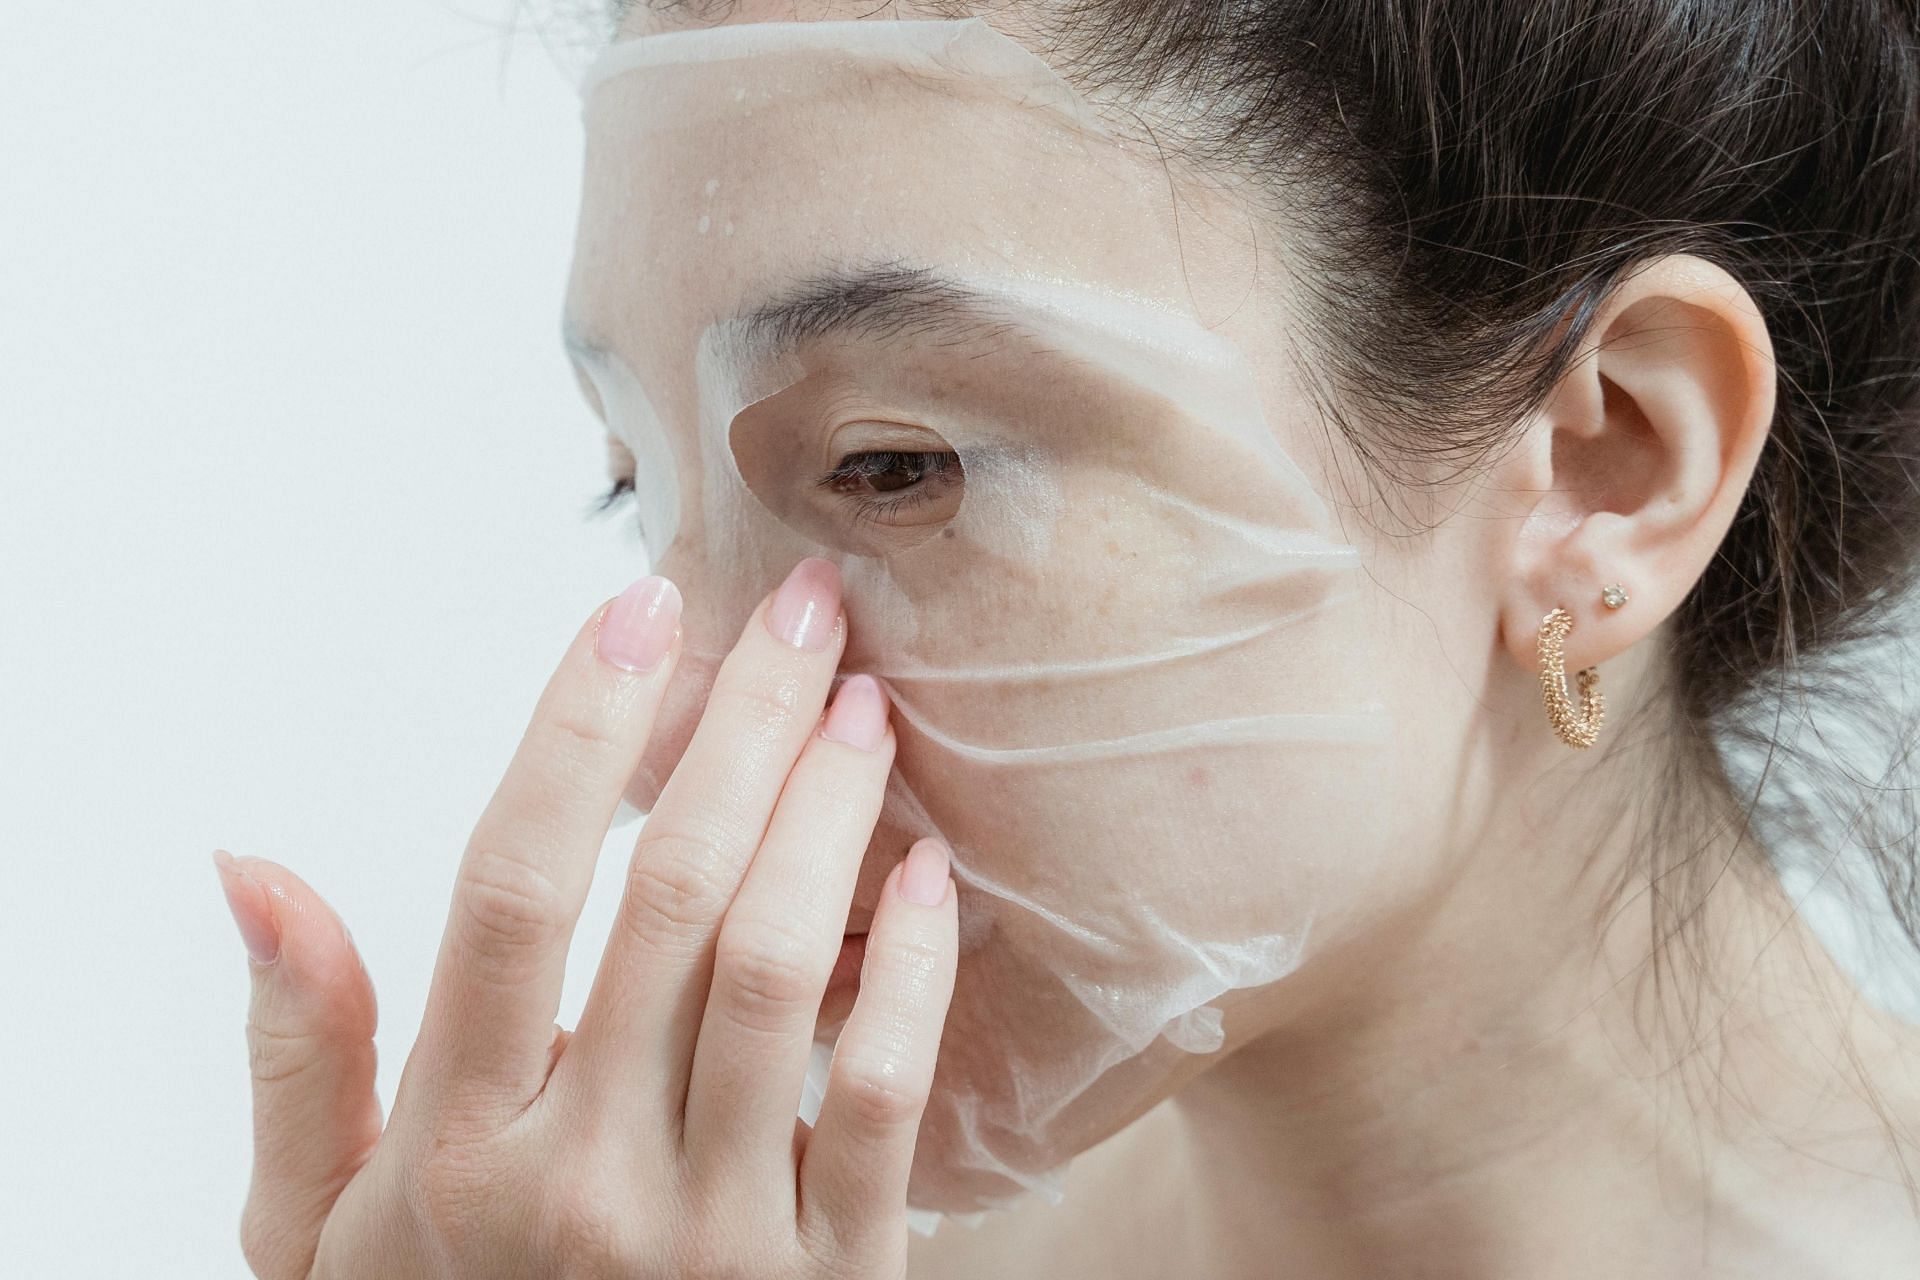 Tips to use a face mask (image sourced via Pexels / Photo by miriam)